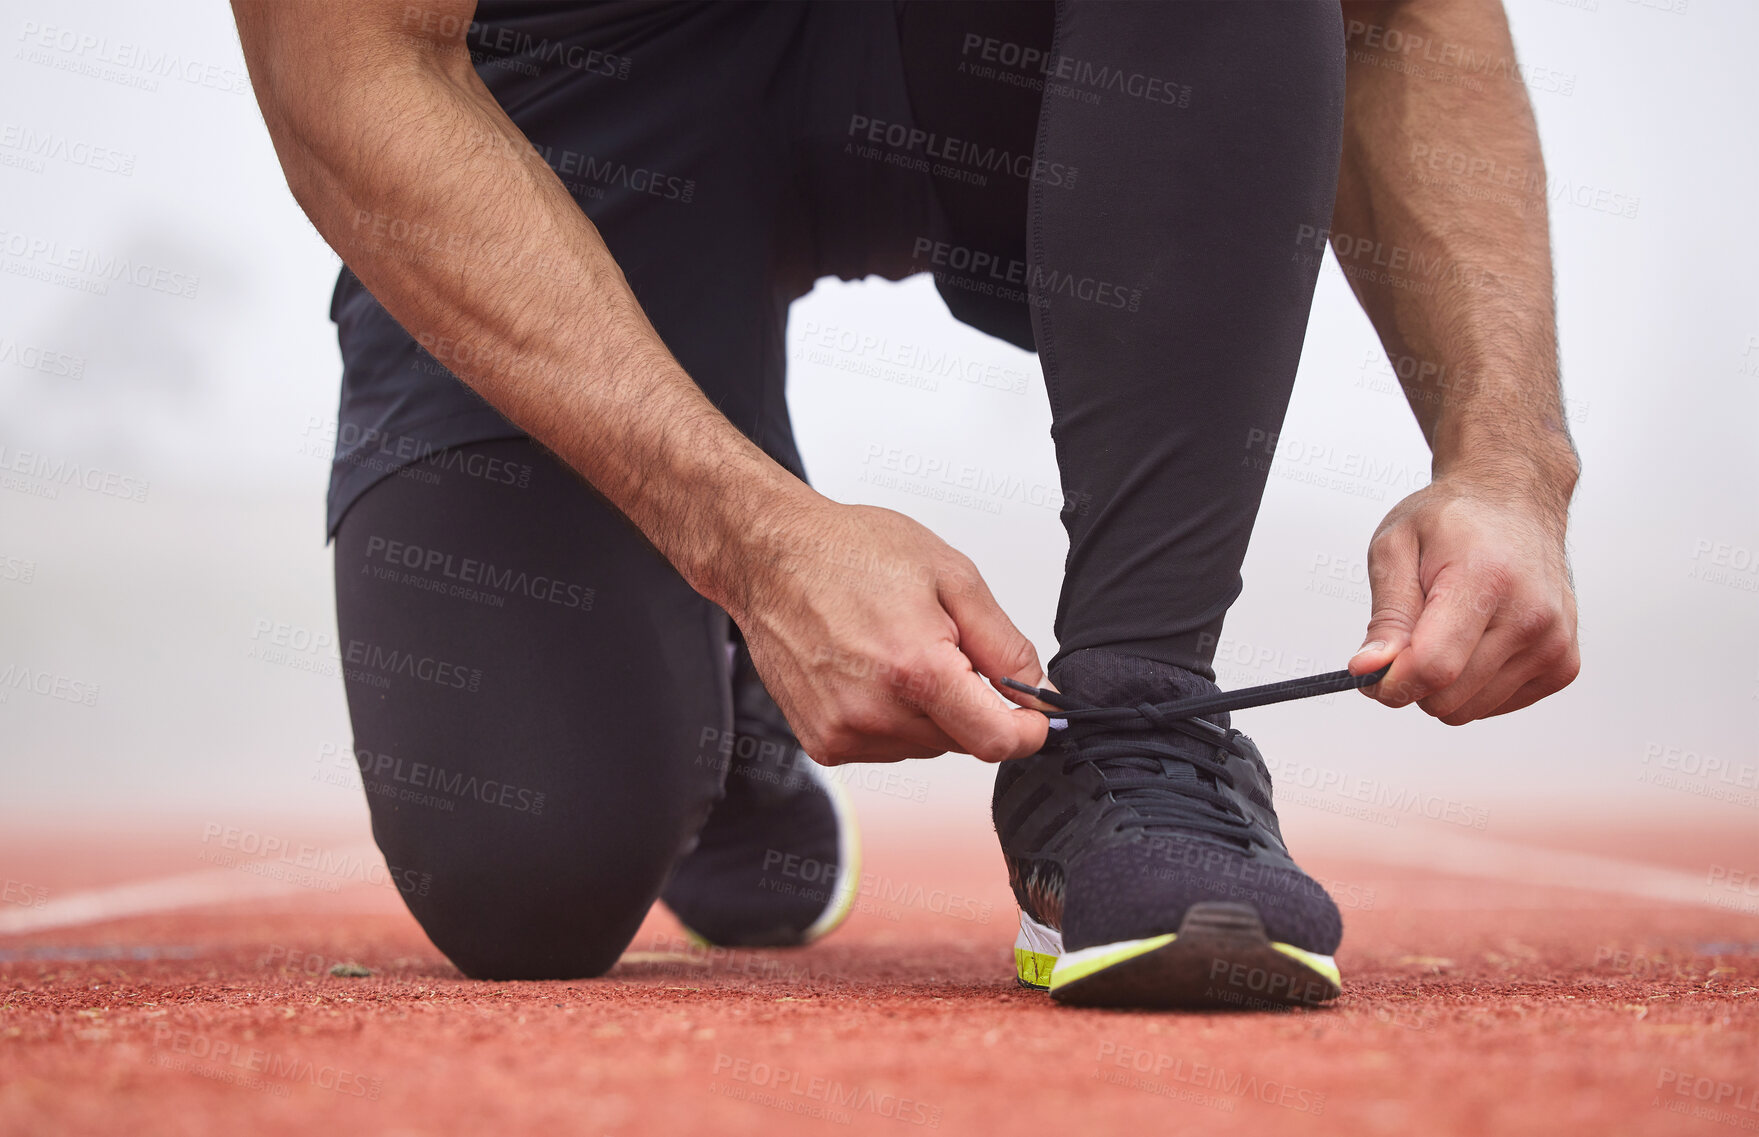 Buy stock photo Cropped shot of an unrecognizable male athlete tying his laces out on the track